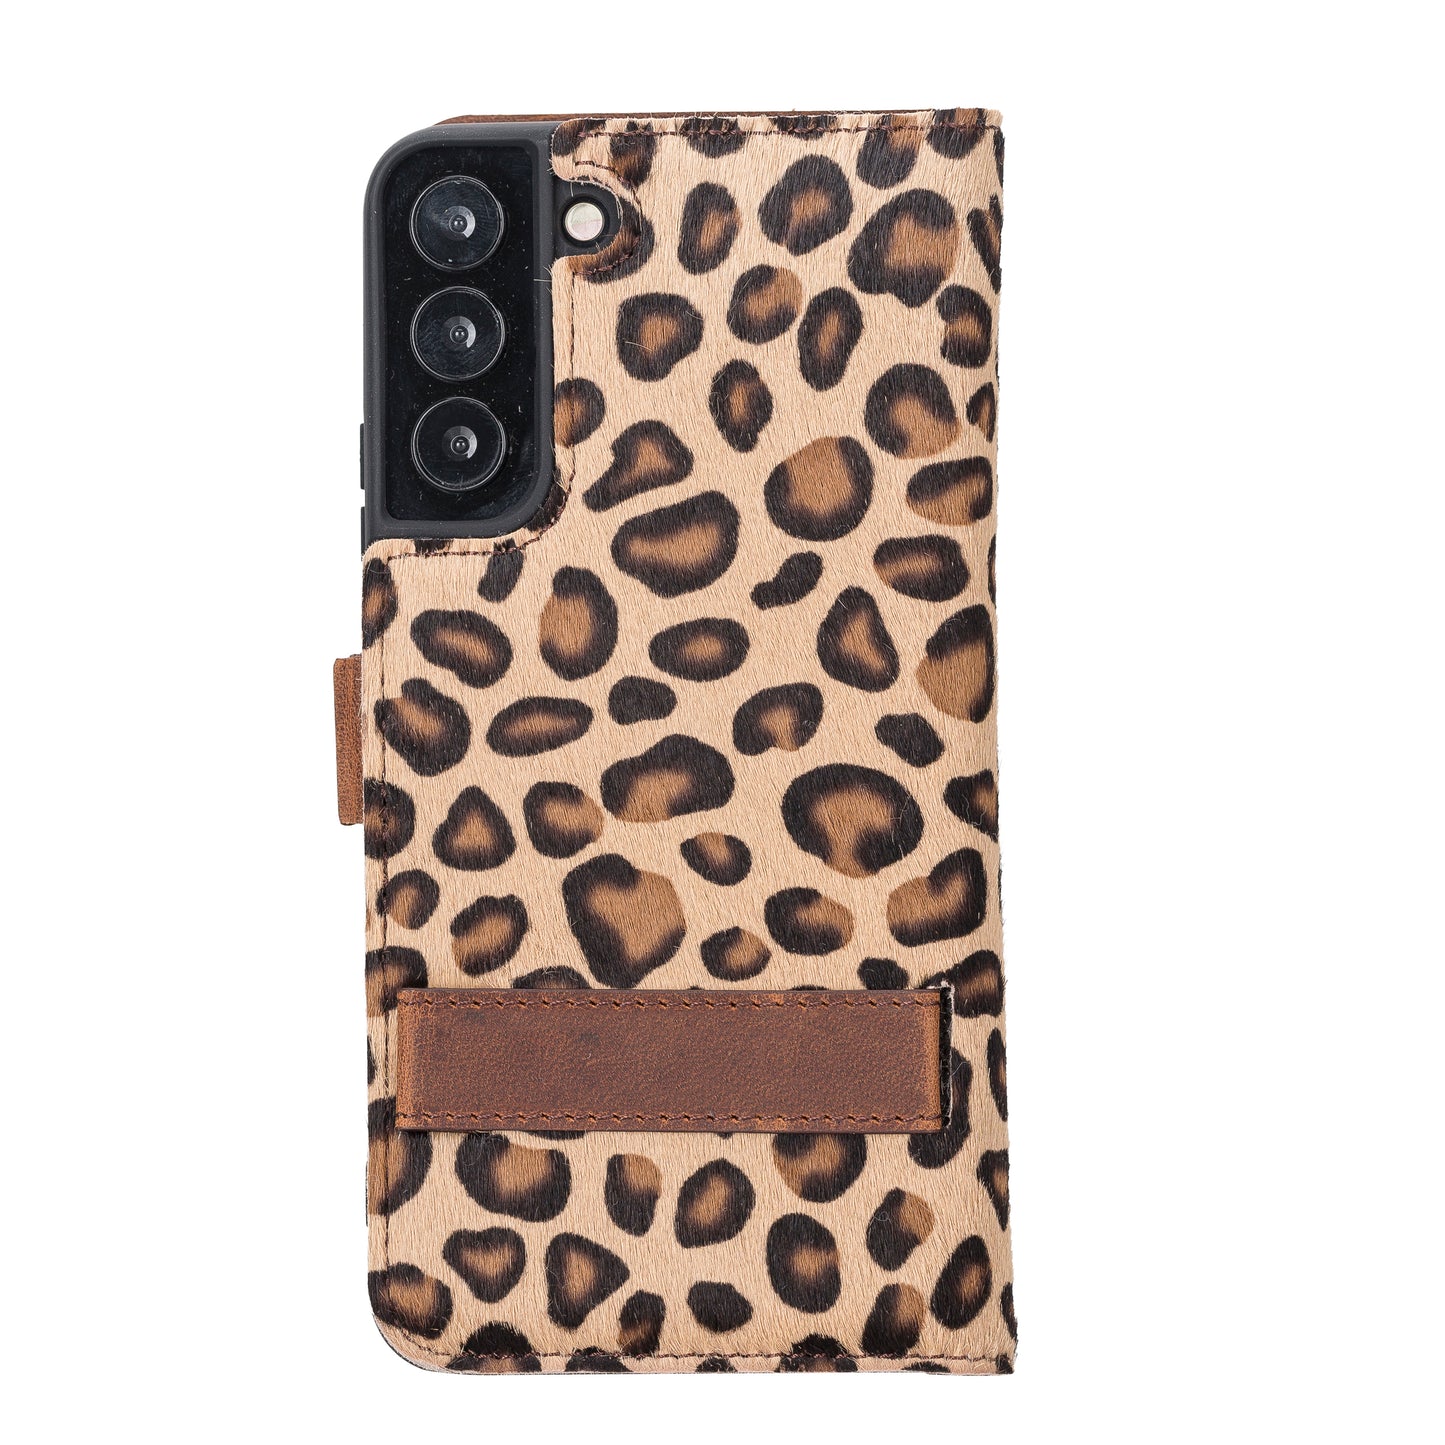 Samsung Galaxy S22 Plus (6.6") Leather Wallet Case - Furry Leopard